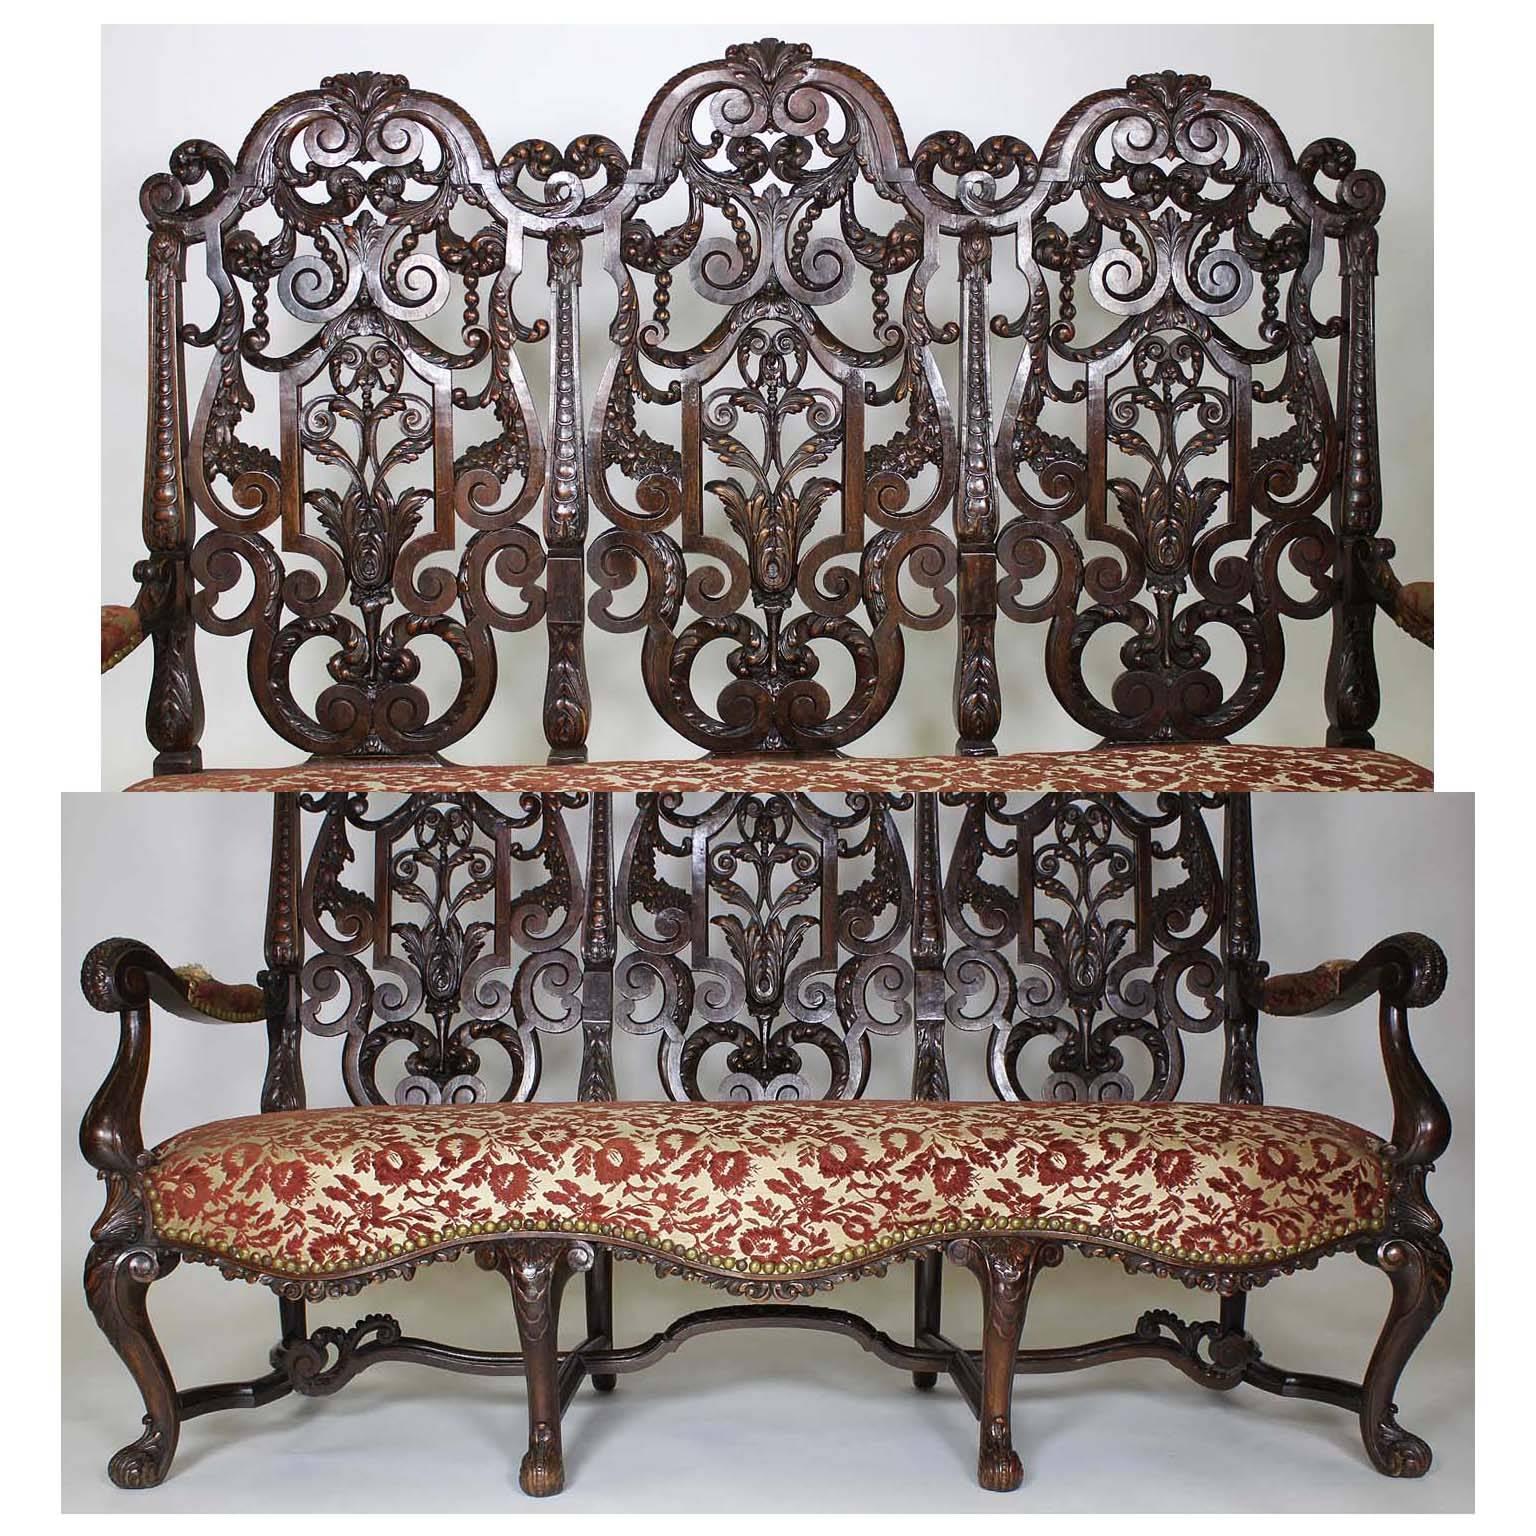 Hand-Carved An Anglo-Dutch 19th Century Walnut Carved 5 Piece Parlor Set, After Daniel Marot For Sale